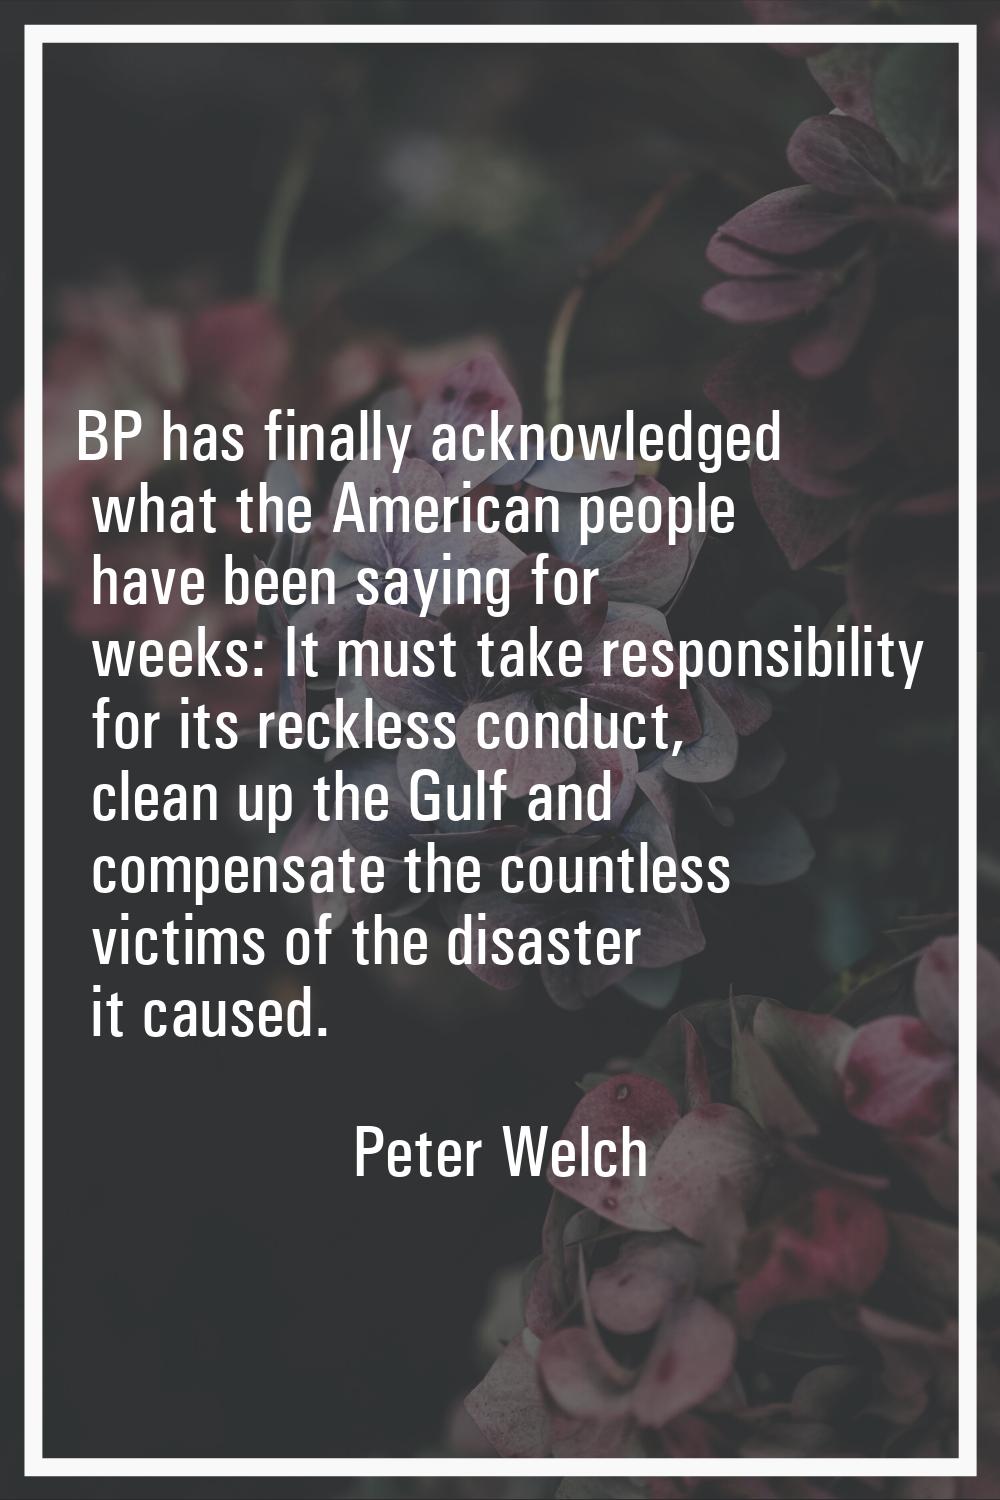 BP has finally acknowledged what the American people have been saying for weeks: It must take respo